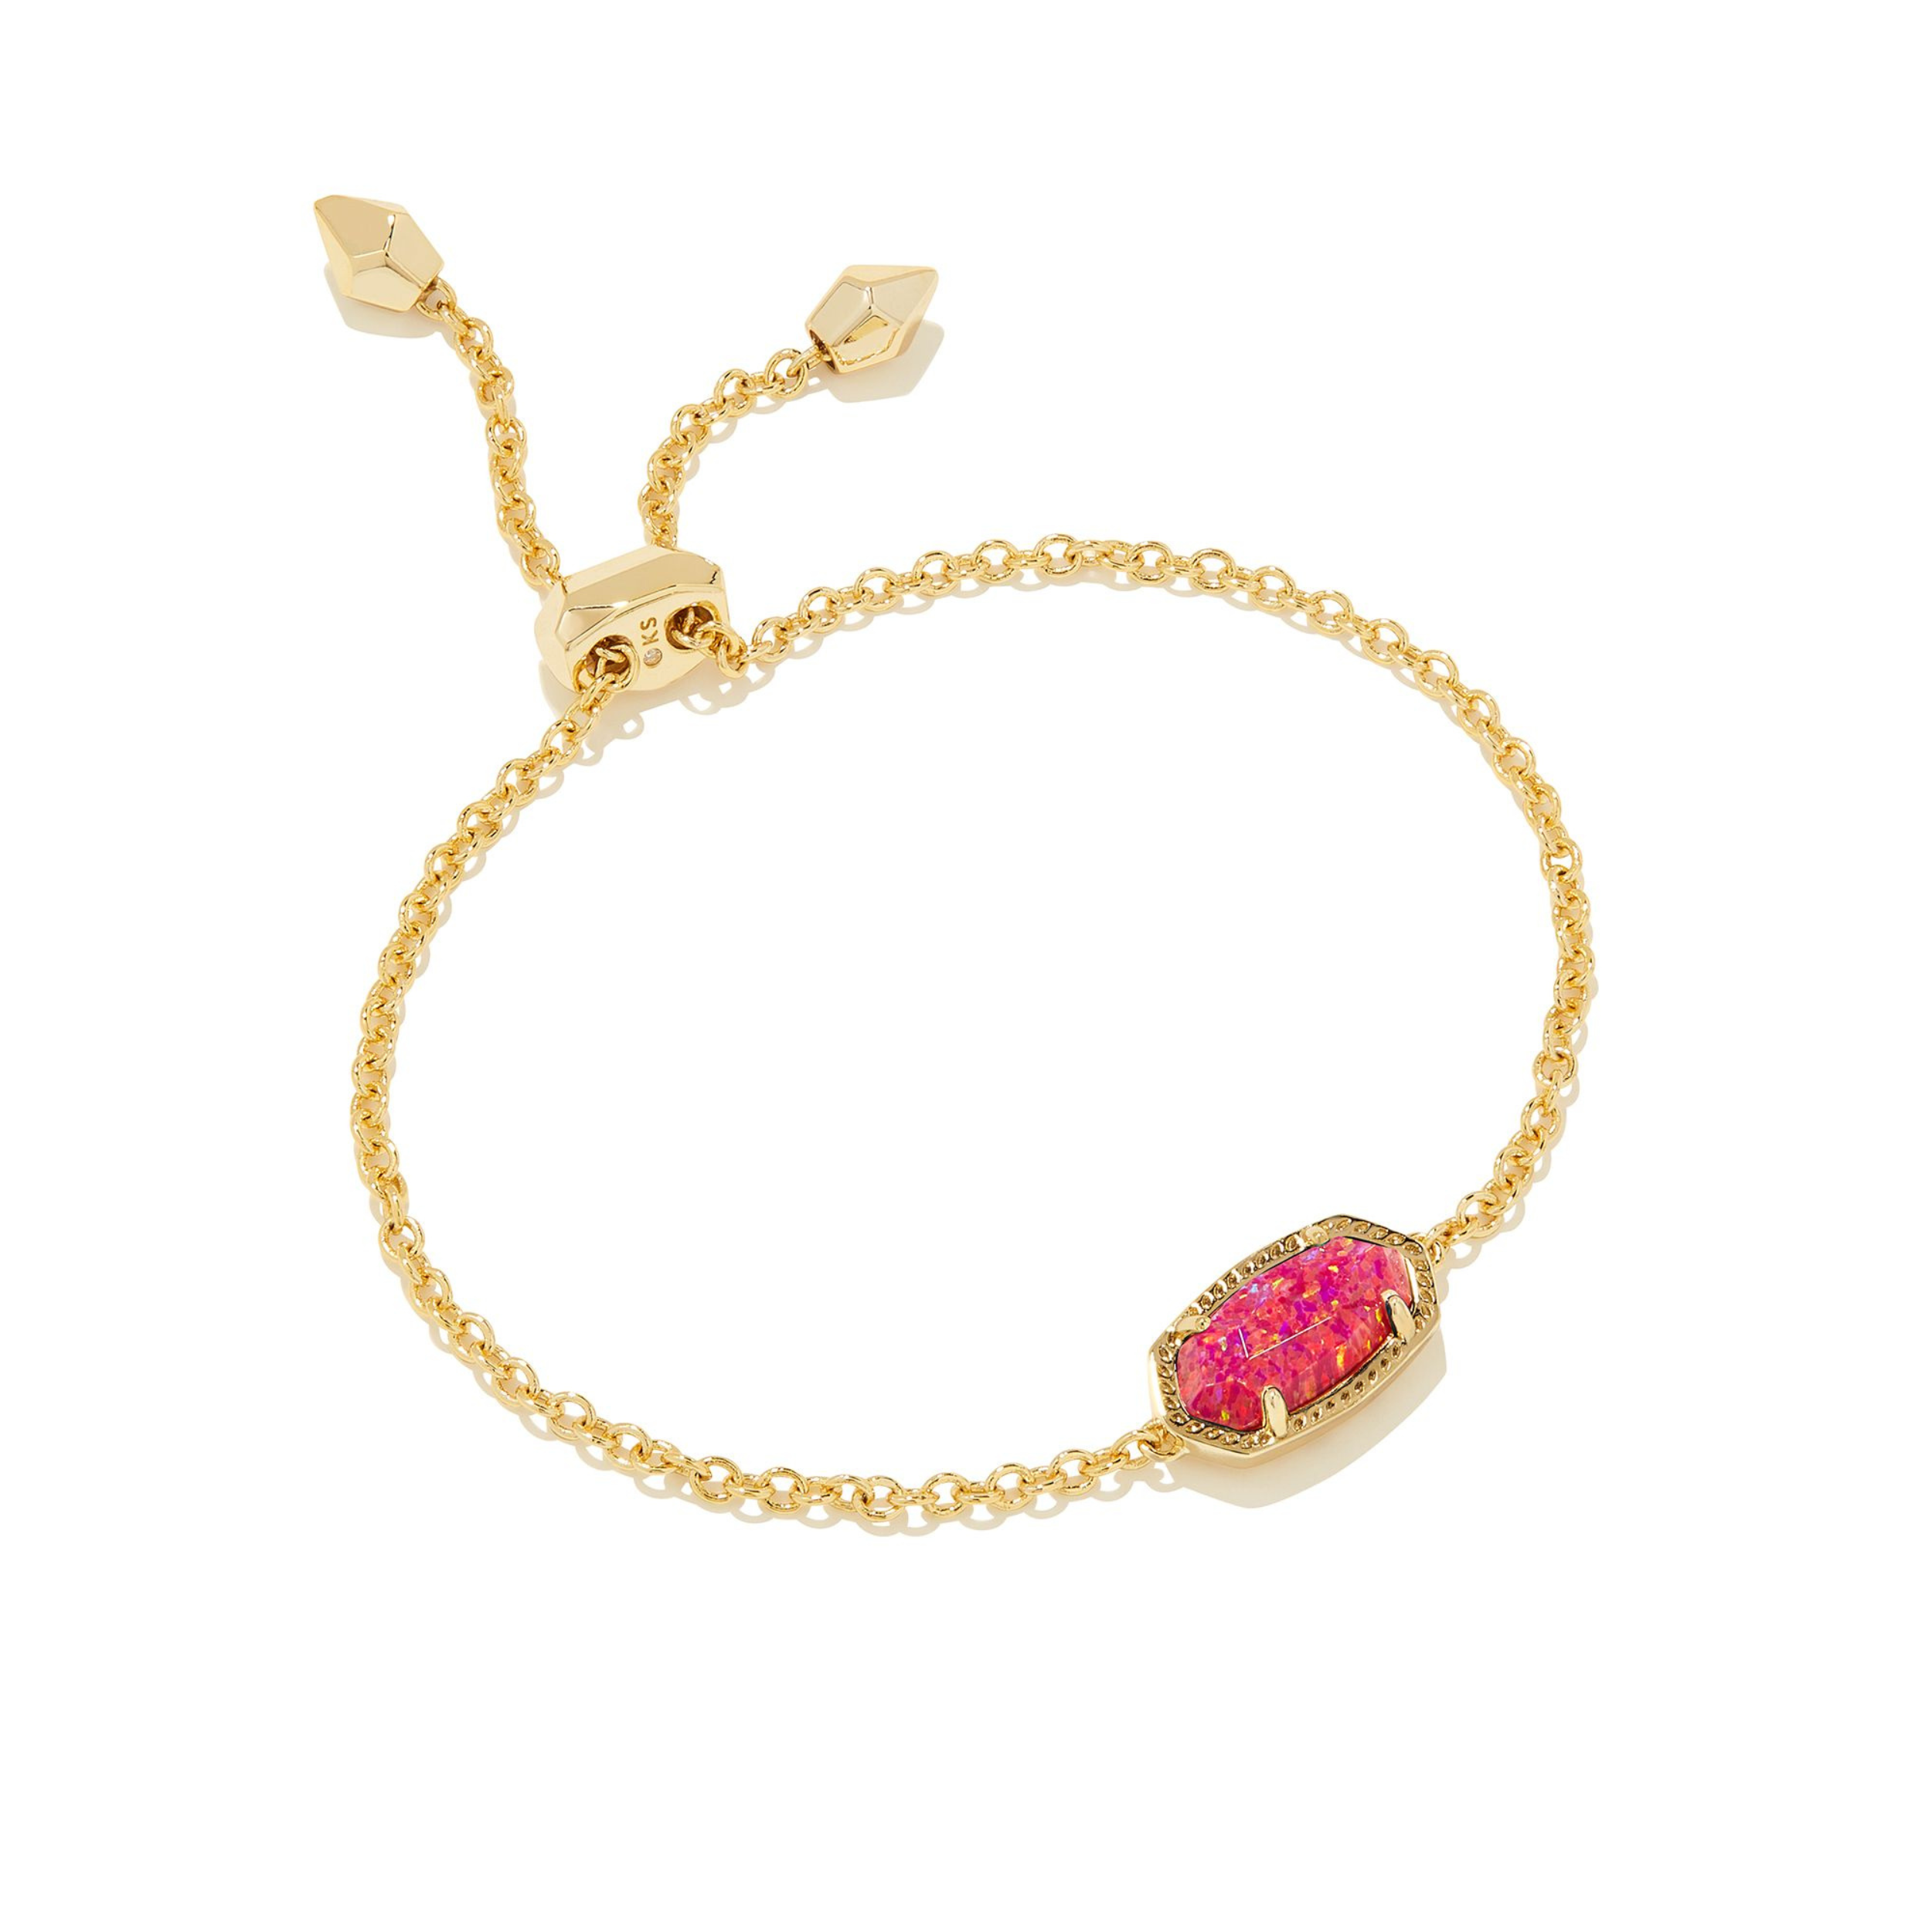 Gold chain bracelet with oval red opal pendant pictured on a white background. 